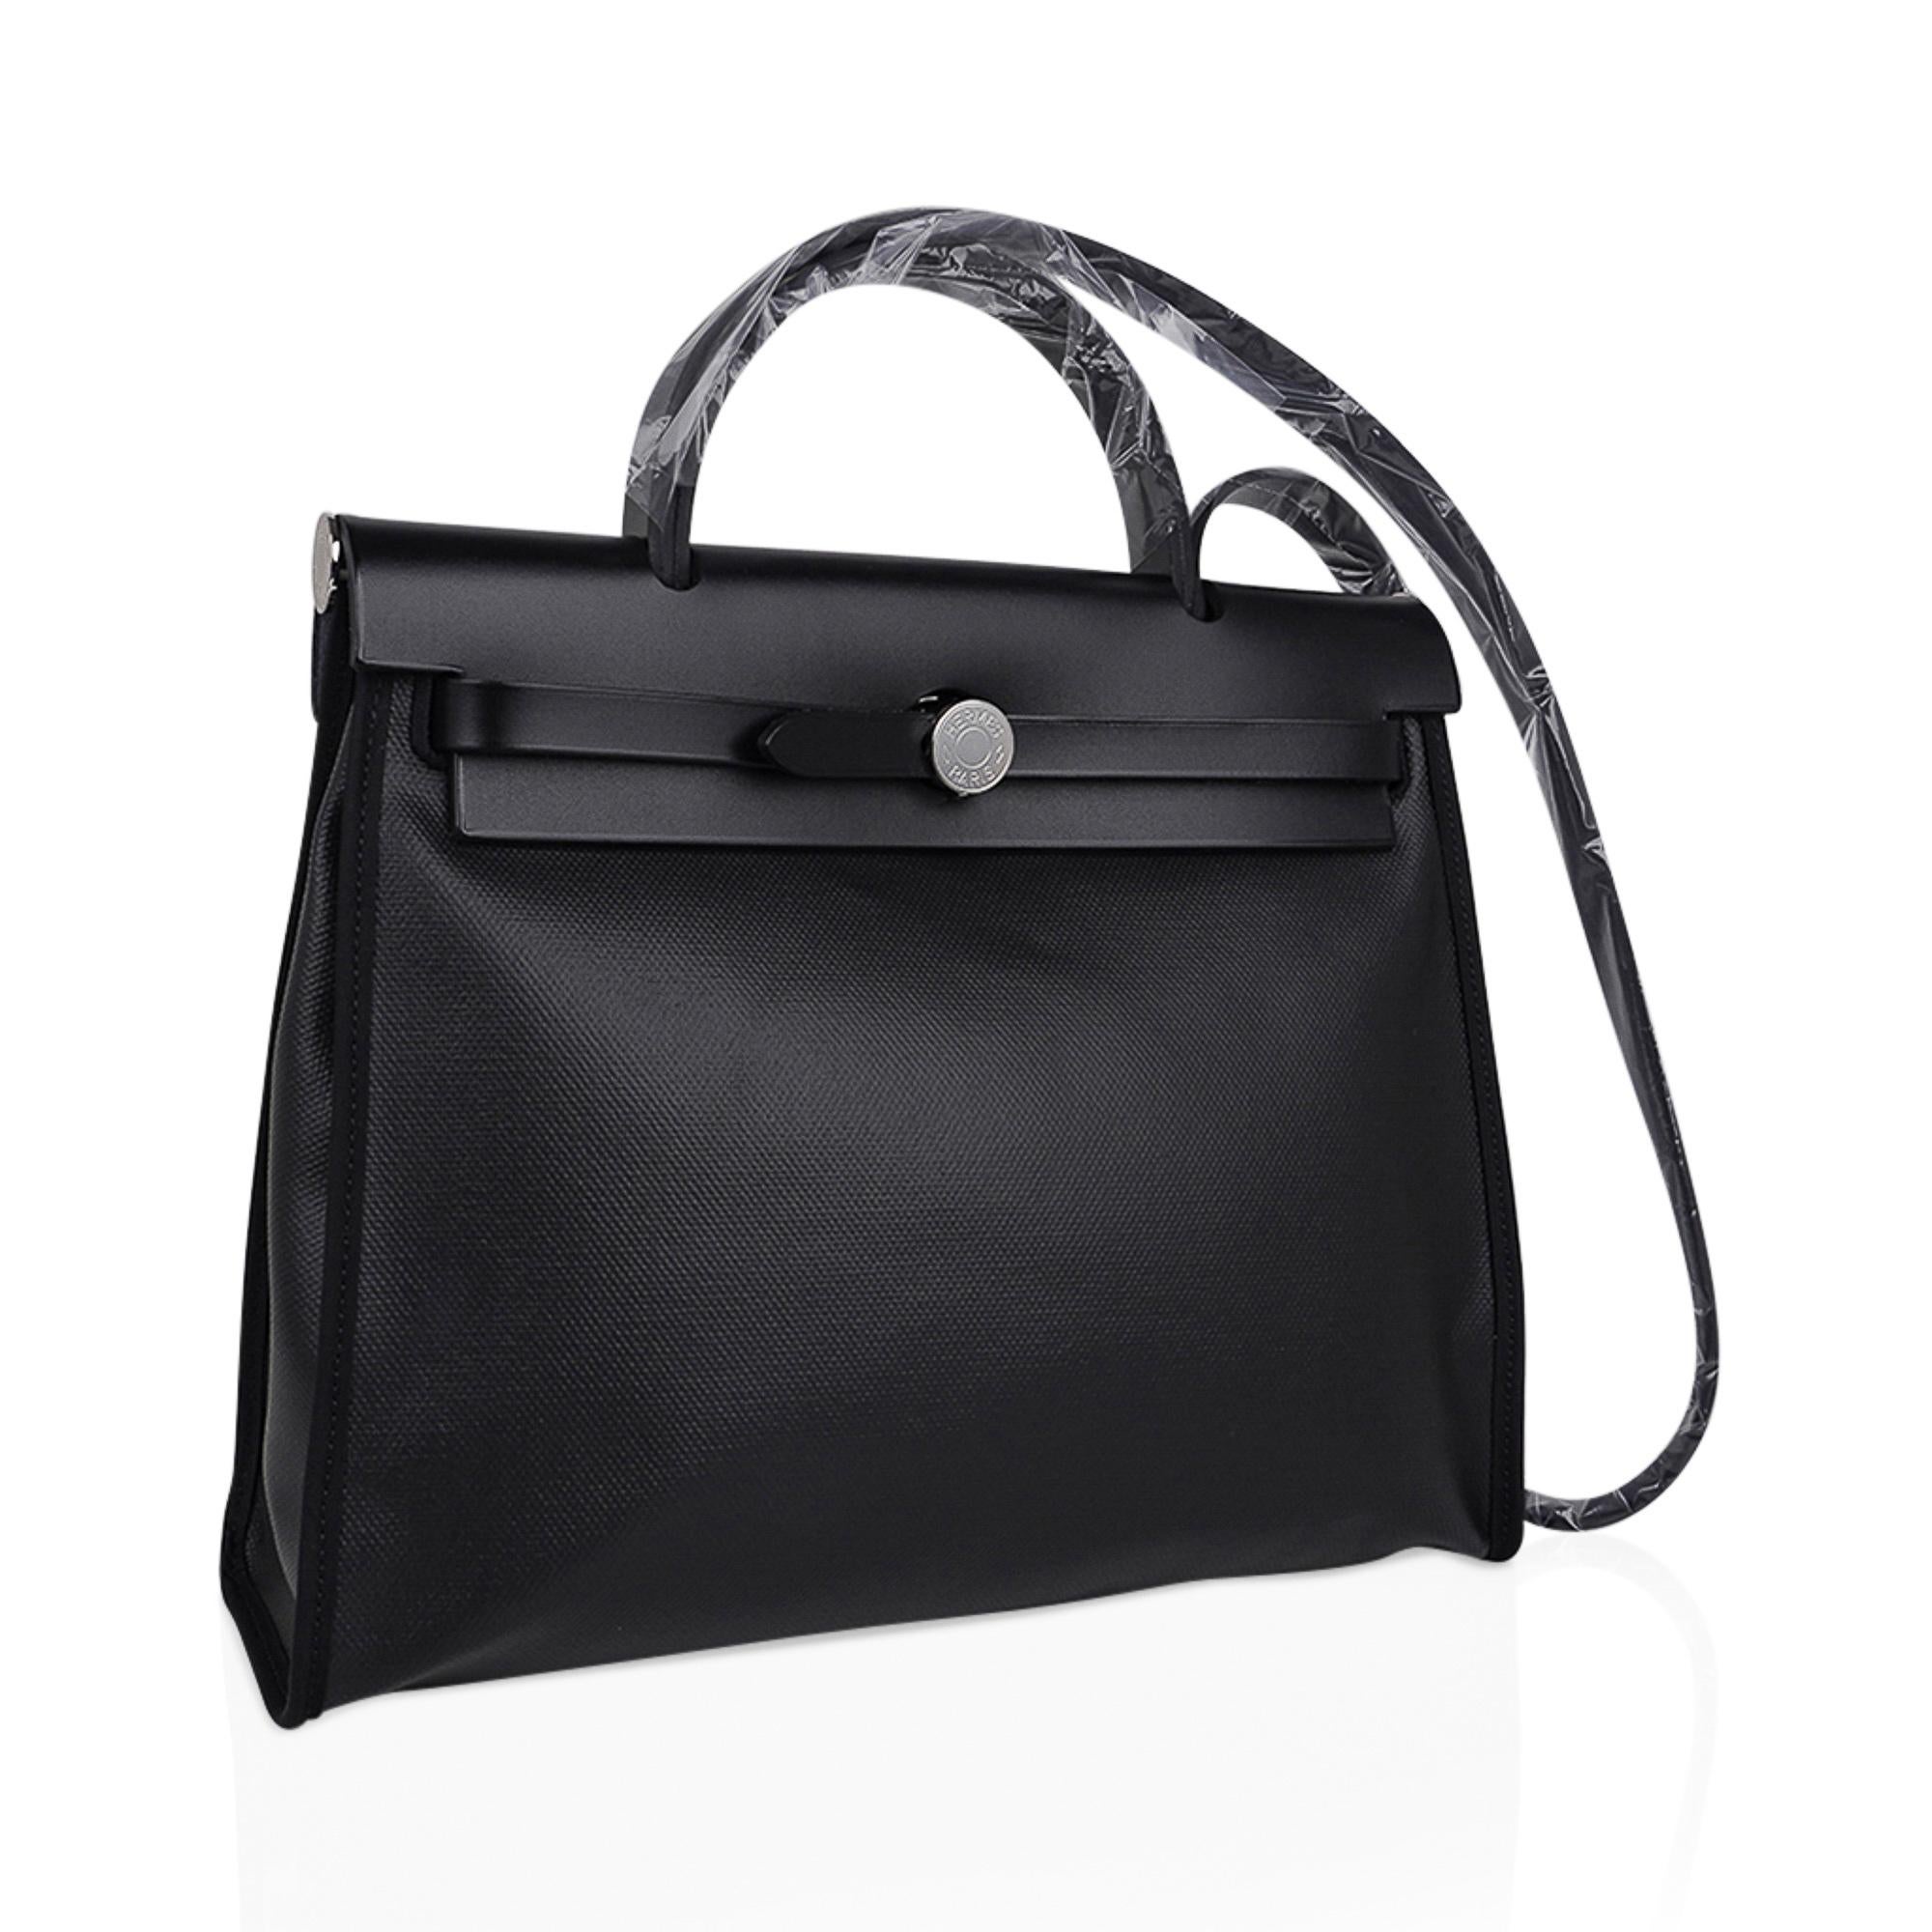 Mightychic offers an Hermes Herbag Zip 31 featured in Black Berline canvas and Black Vache Hunter leather.
Signature Herbag Clou de Selle in Palladium hardware.
This water resistant Hermes Herbag  has Black and Ecru Toile removable pochette and rear